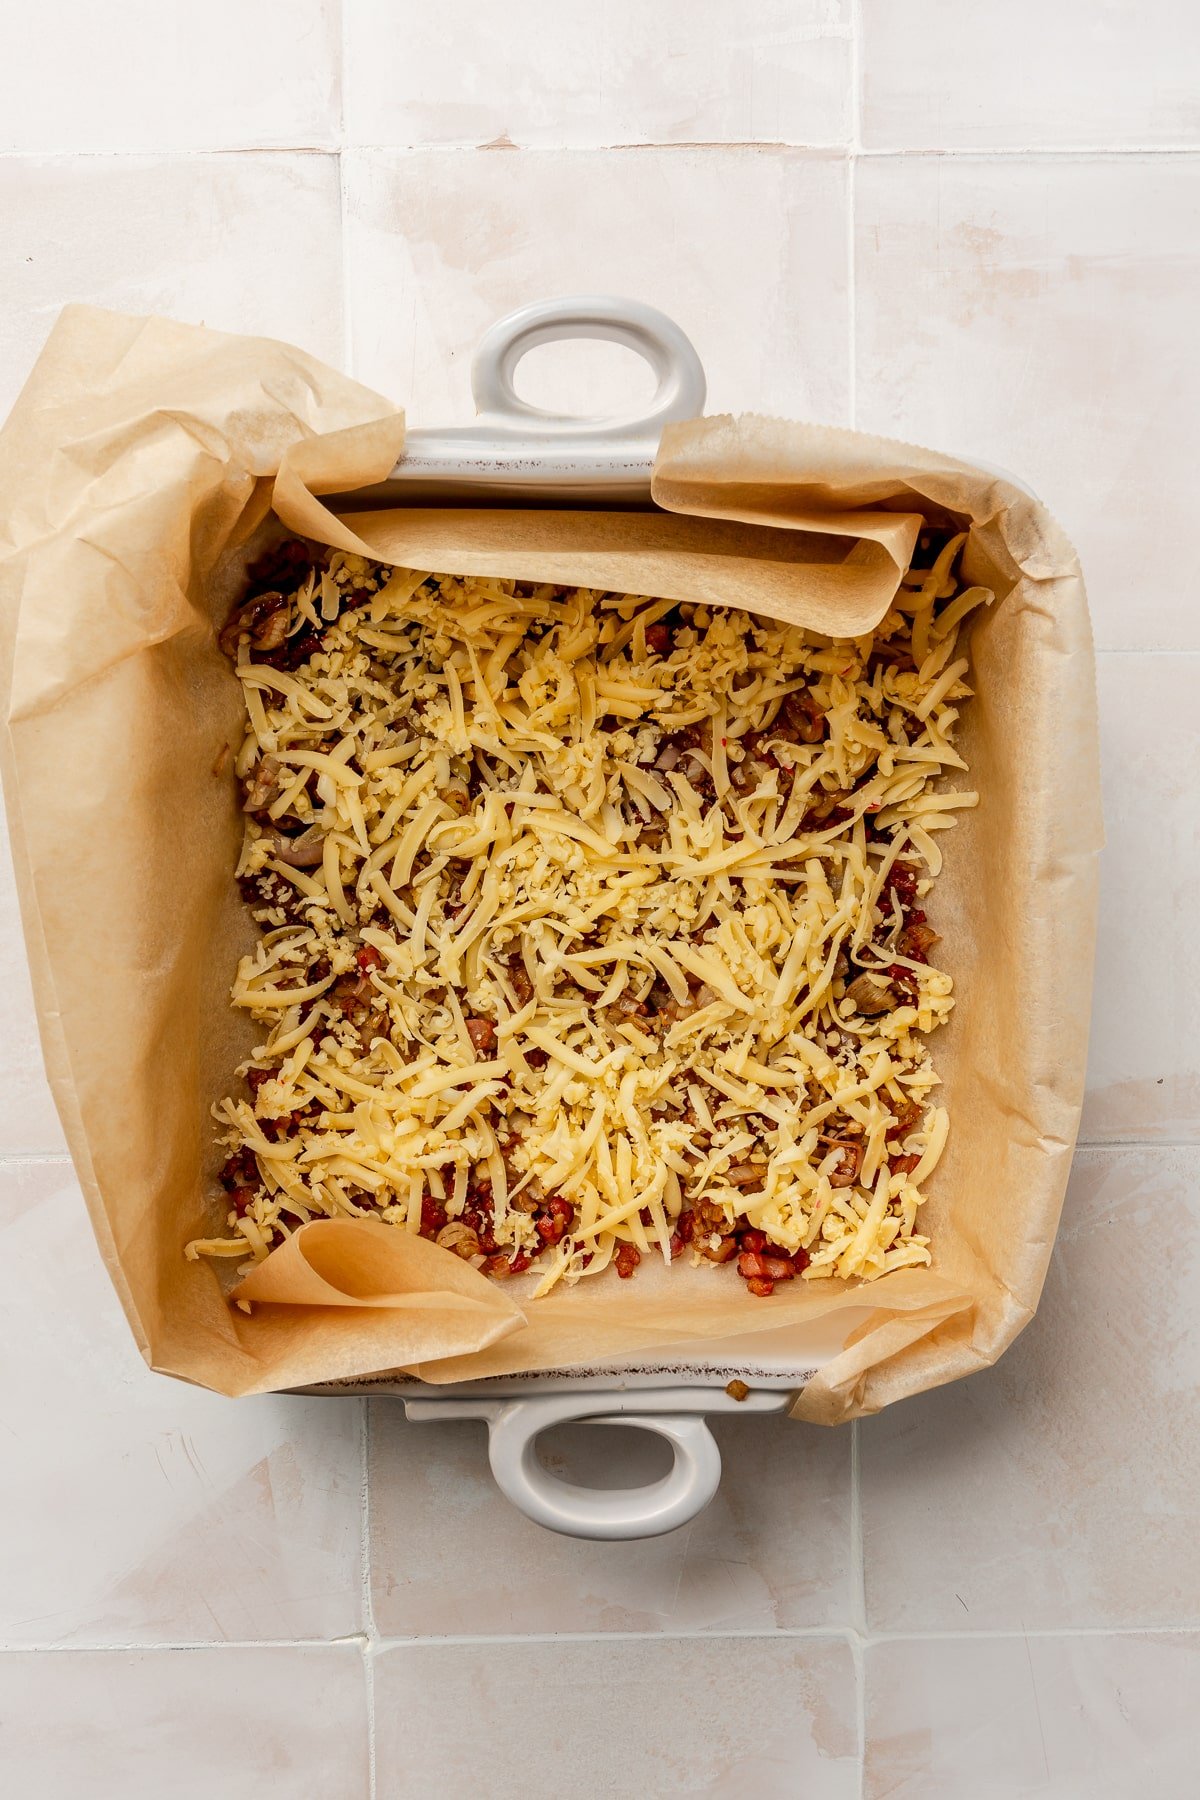 A white shredded cheese and bacon bits have been added to the bottom of a parchment paper lined baking dish.